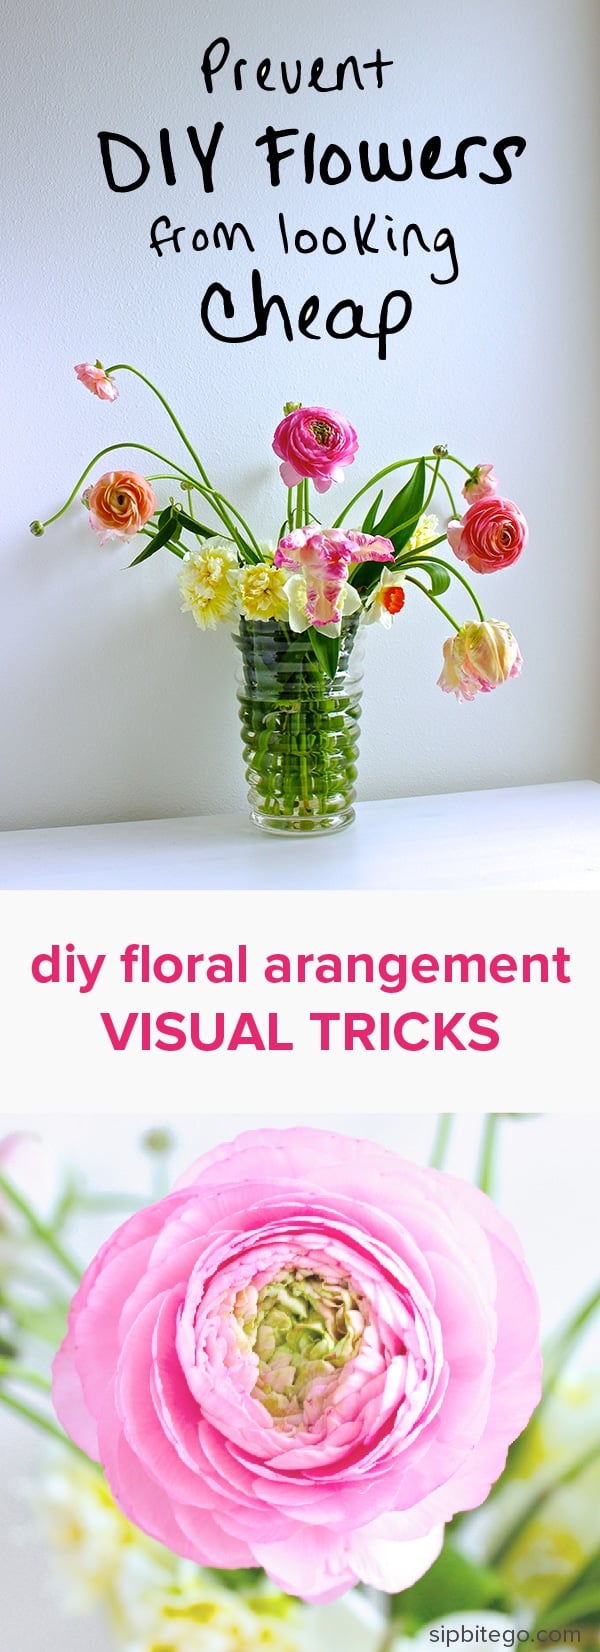 Learn how to prevent a simple floral arrangement from looking cheap in this tutorial for a floral arrangement with pink peonies on a mirror centerpiece. From outdoor garden weddings to rustic barn receptions, these floral garden wedding ideas will help make your DIY floral arrangement look expensive and professional. Make your own flower arrangement for your wedding day. Find more at sipbitego.com